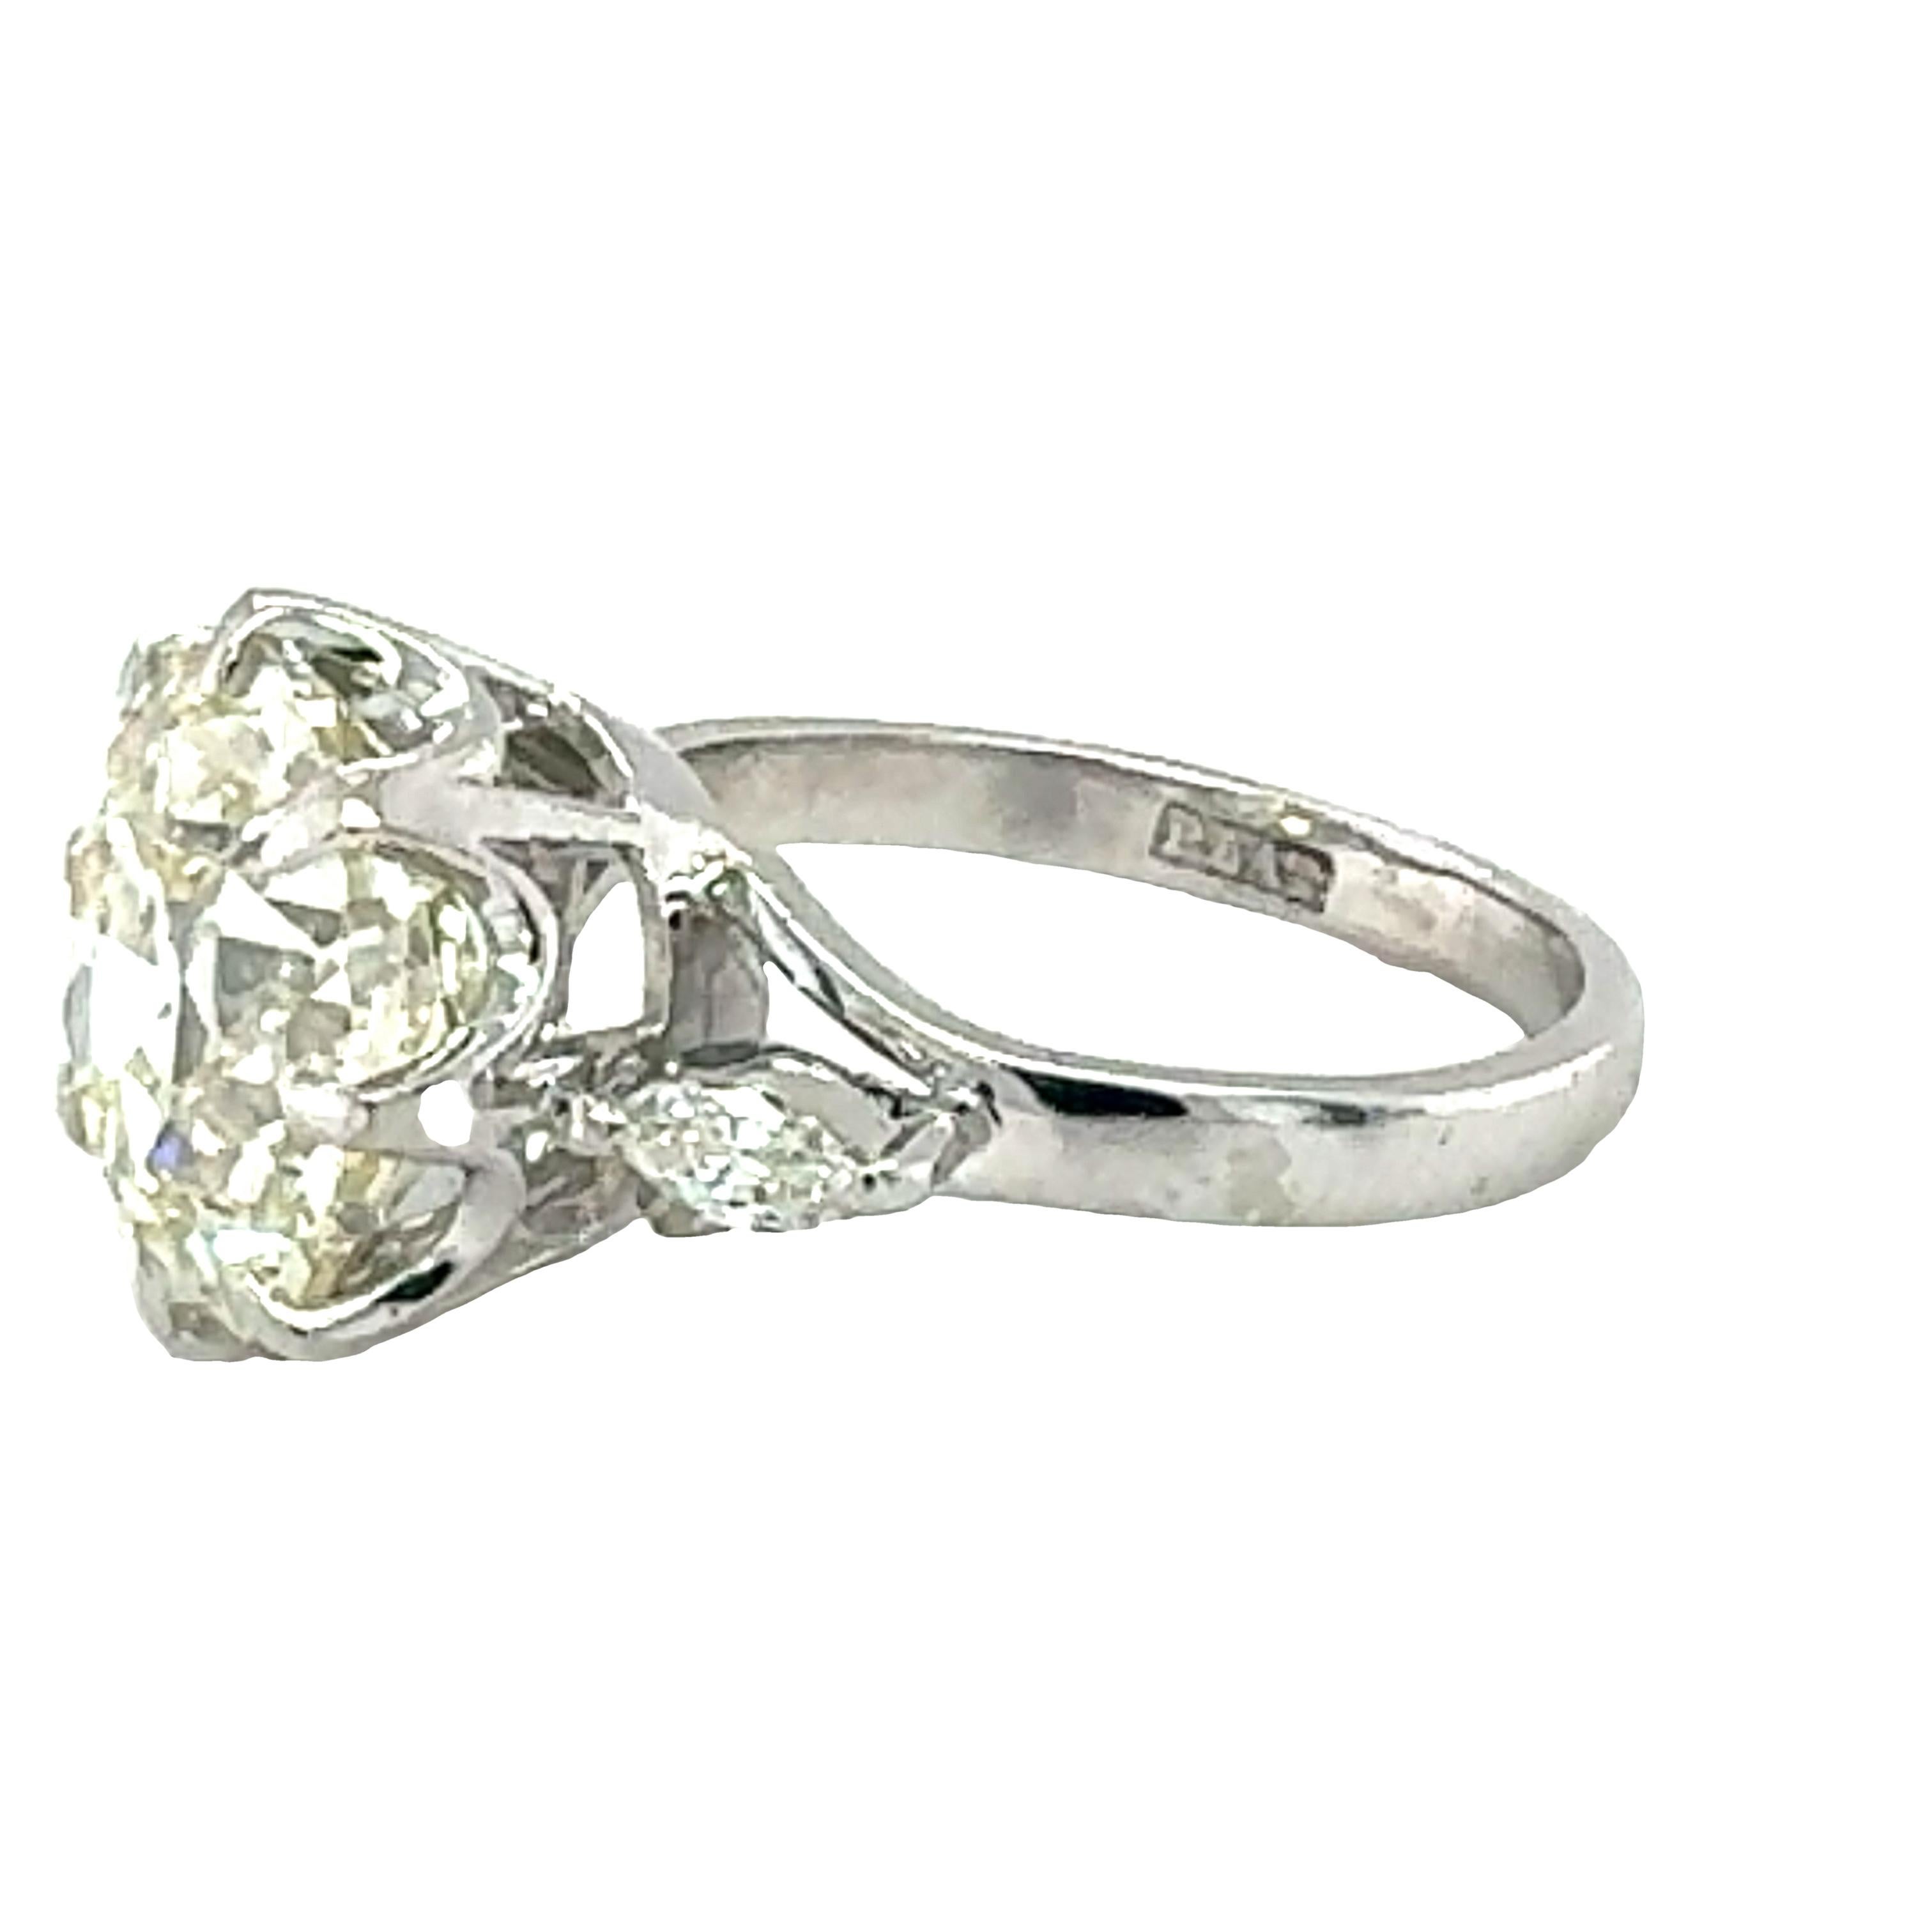 GIA Certified 6.16 Carat Diamond Platinum Victorian Engagement Ring In Good Condition For Sale In Beverly Hills, CA